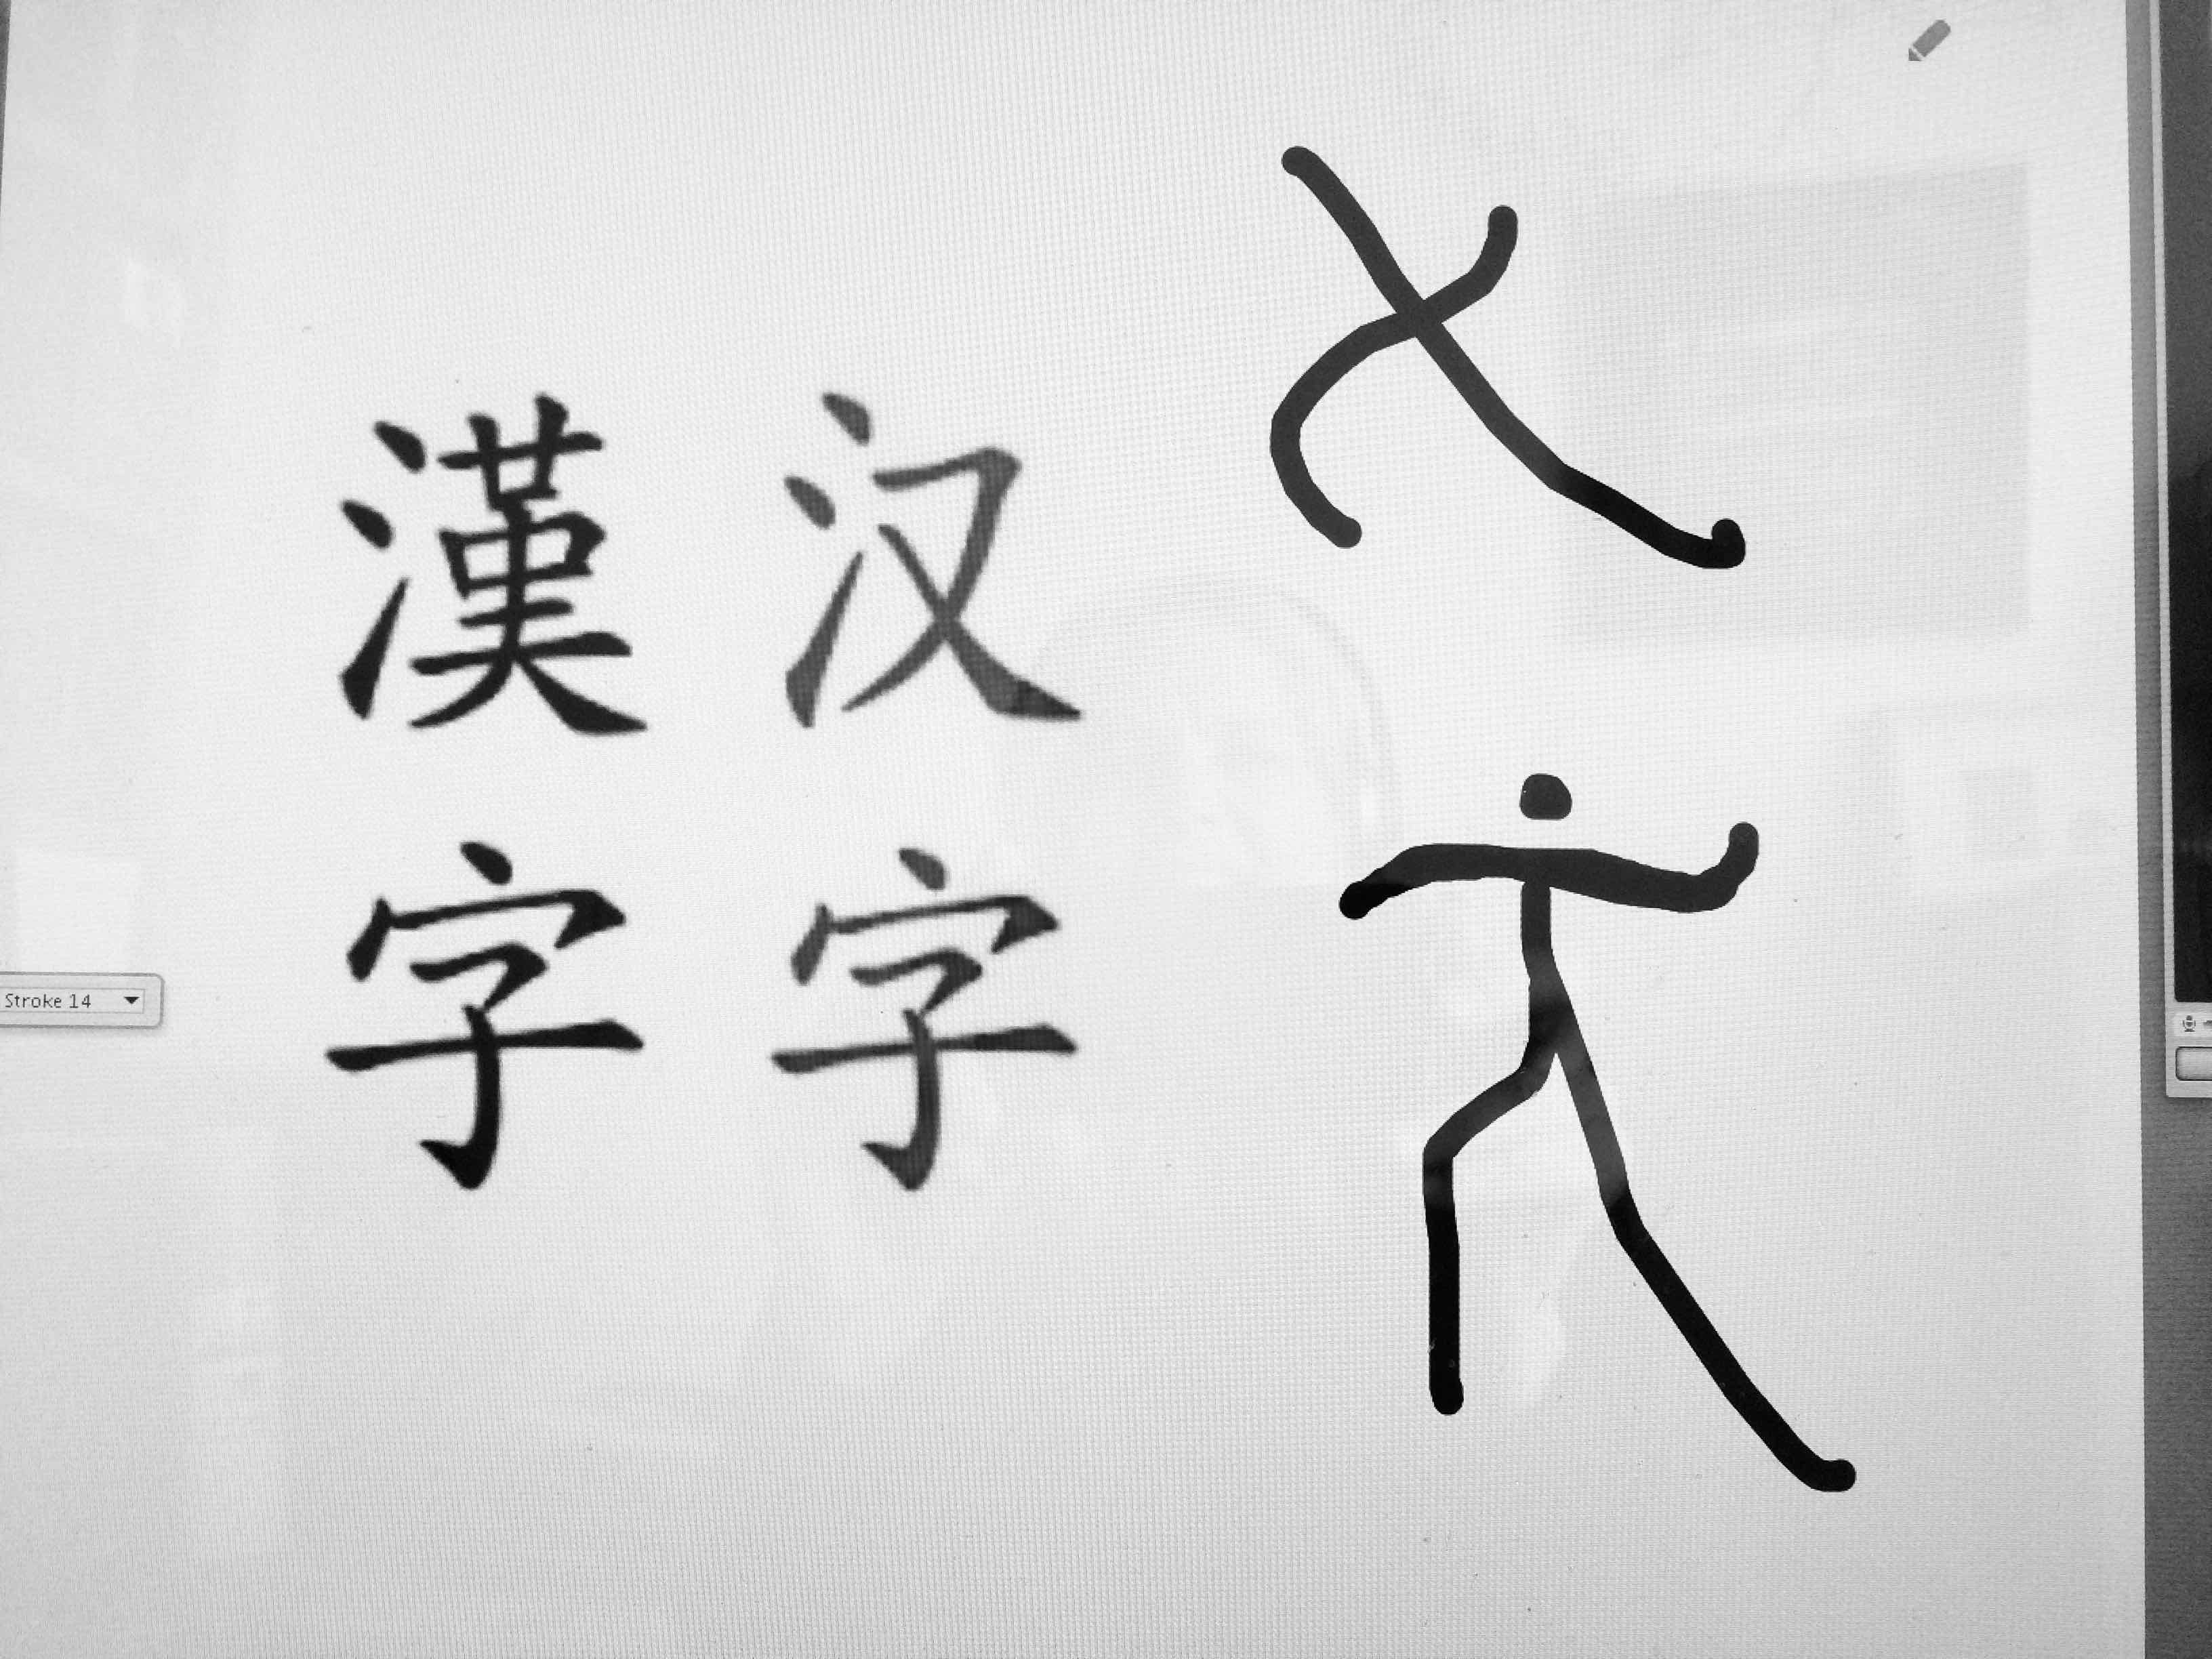 We looked back again at the CHINESE script symbols from the beginning of our explorations on balance and made a strong connection between WRITING and DRAWING...